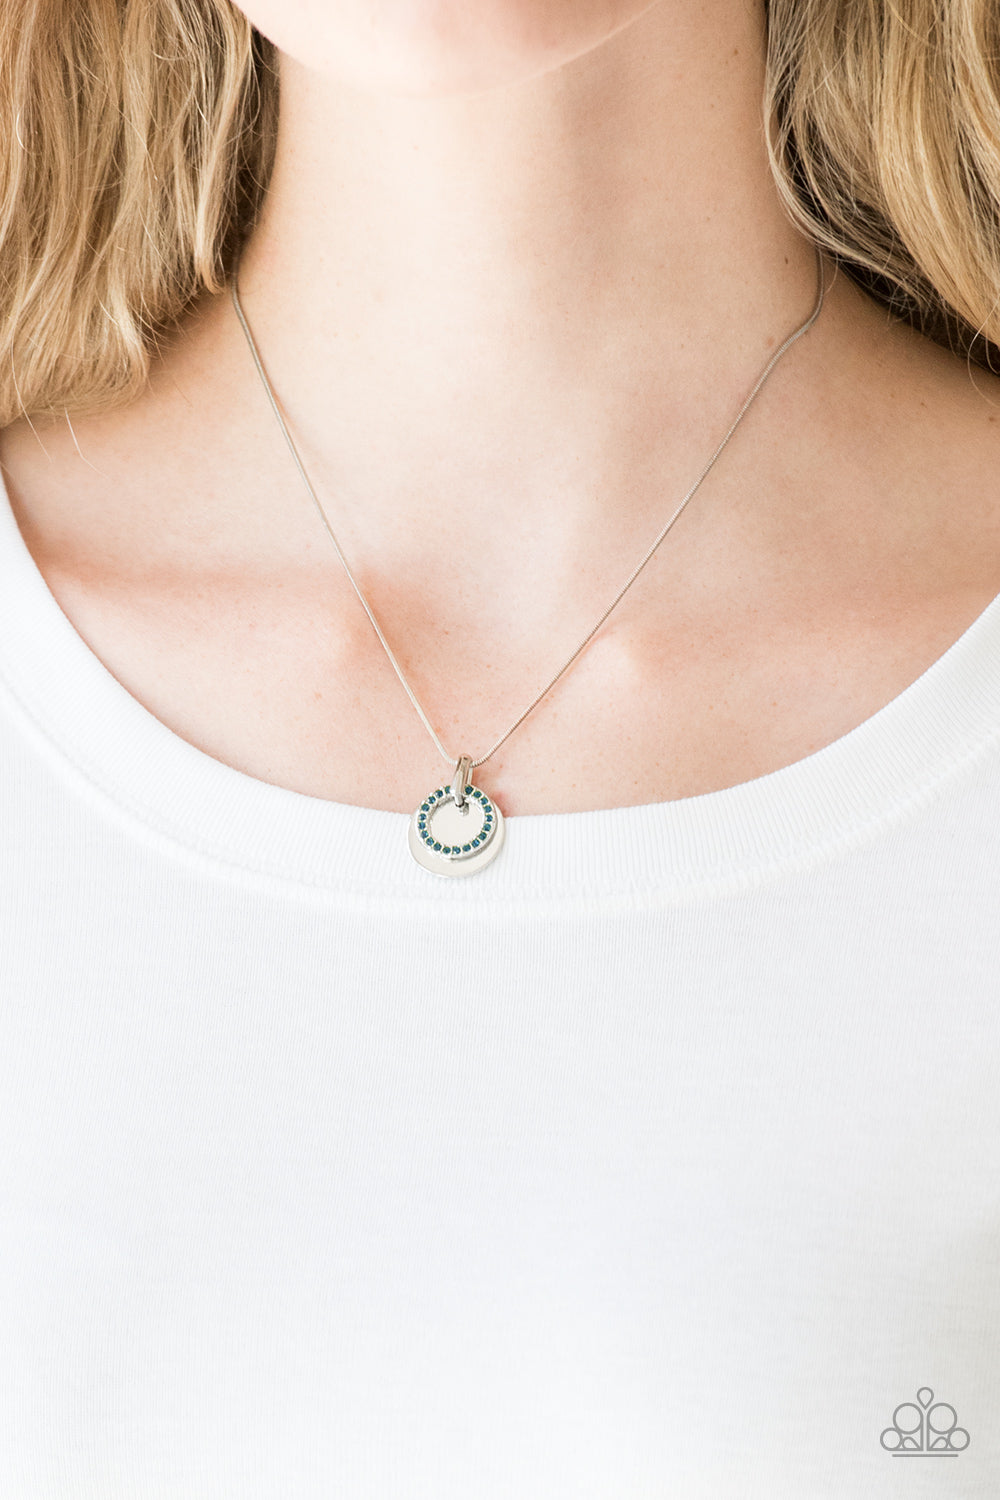 Front and Centered Blue Necklace